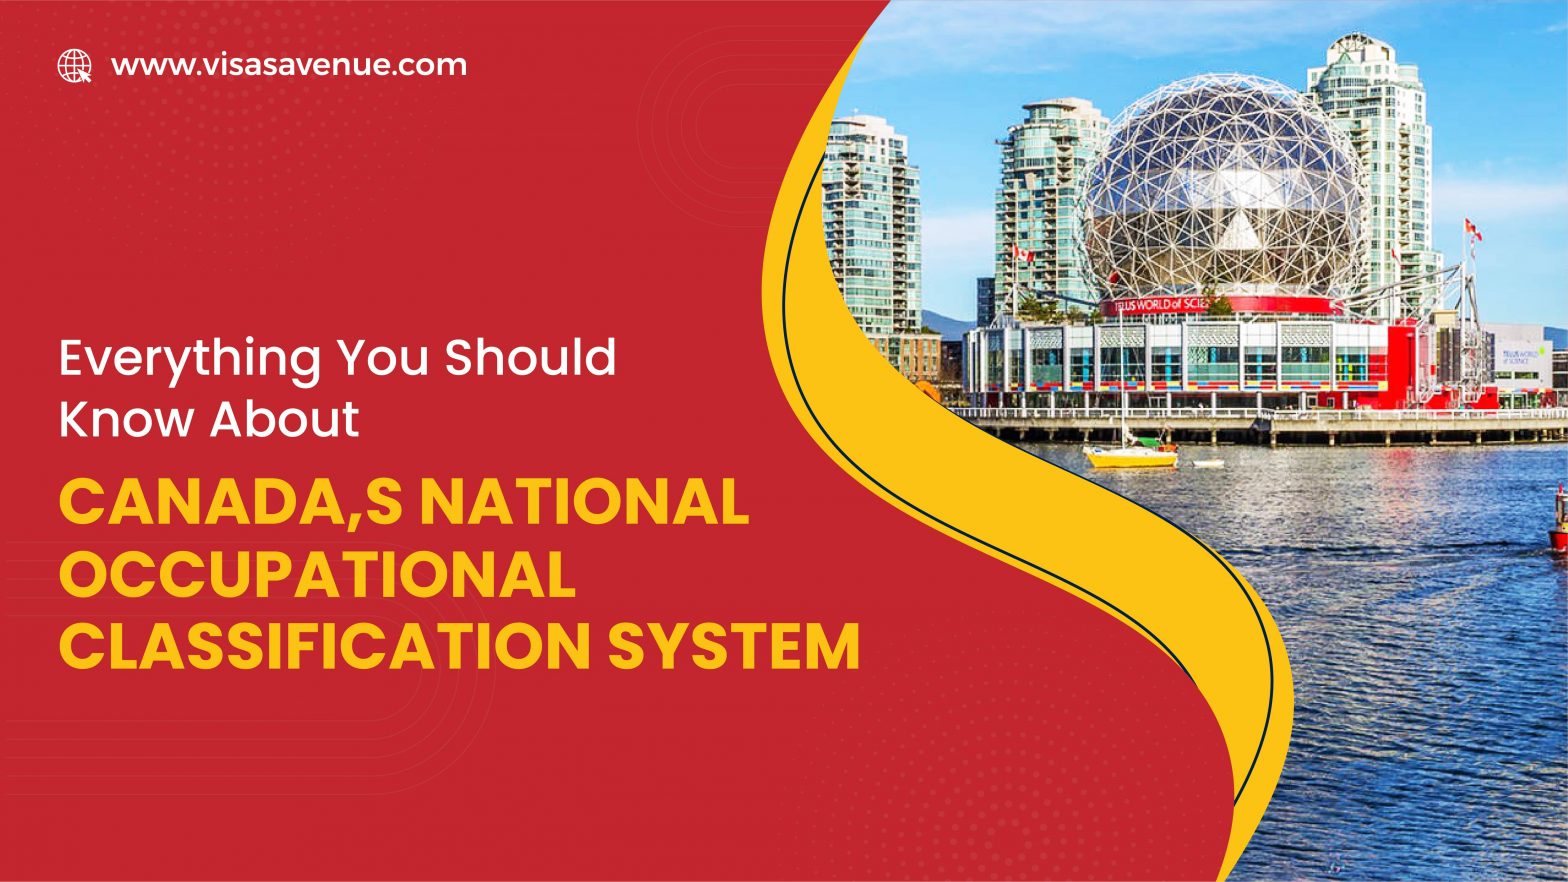 Canada's National Occupational Classification System